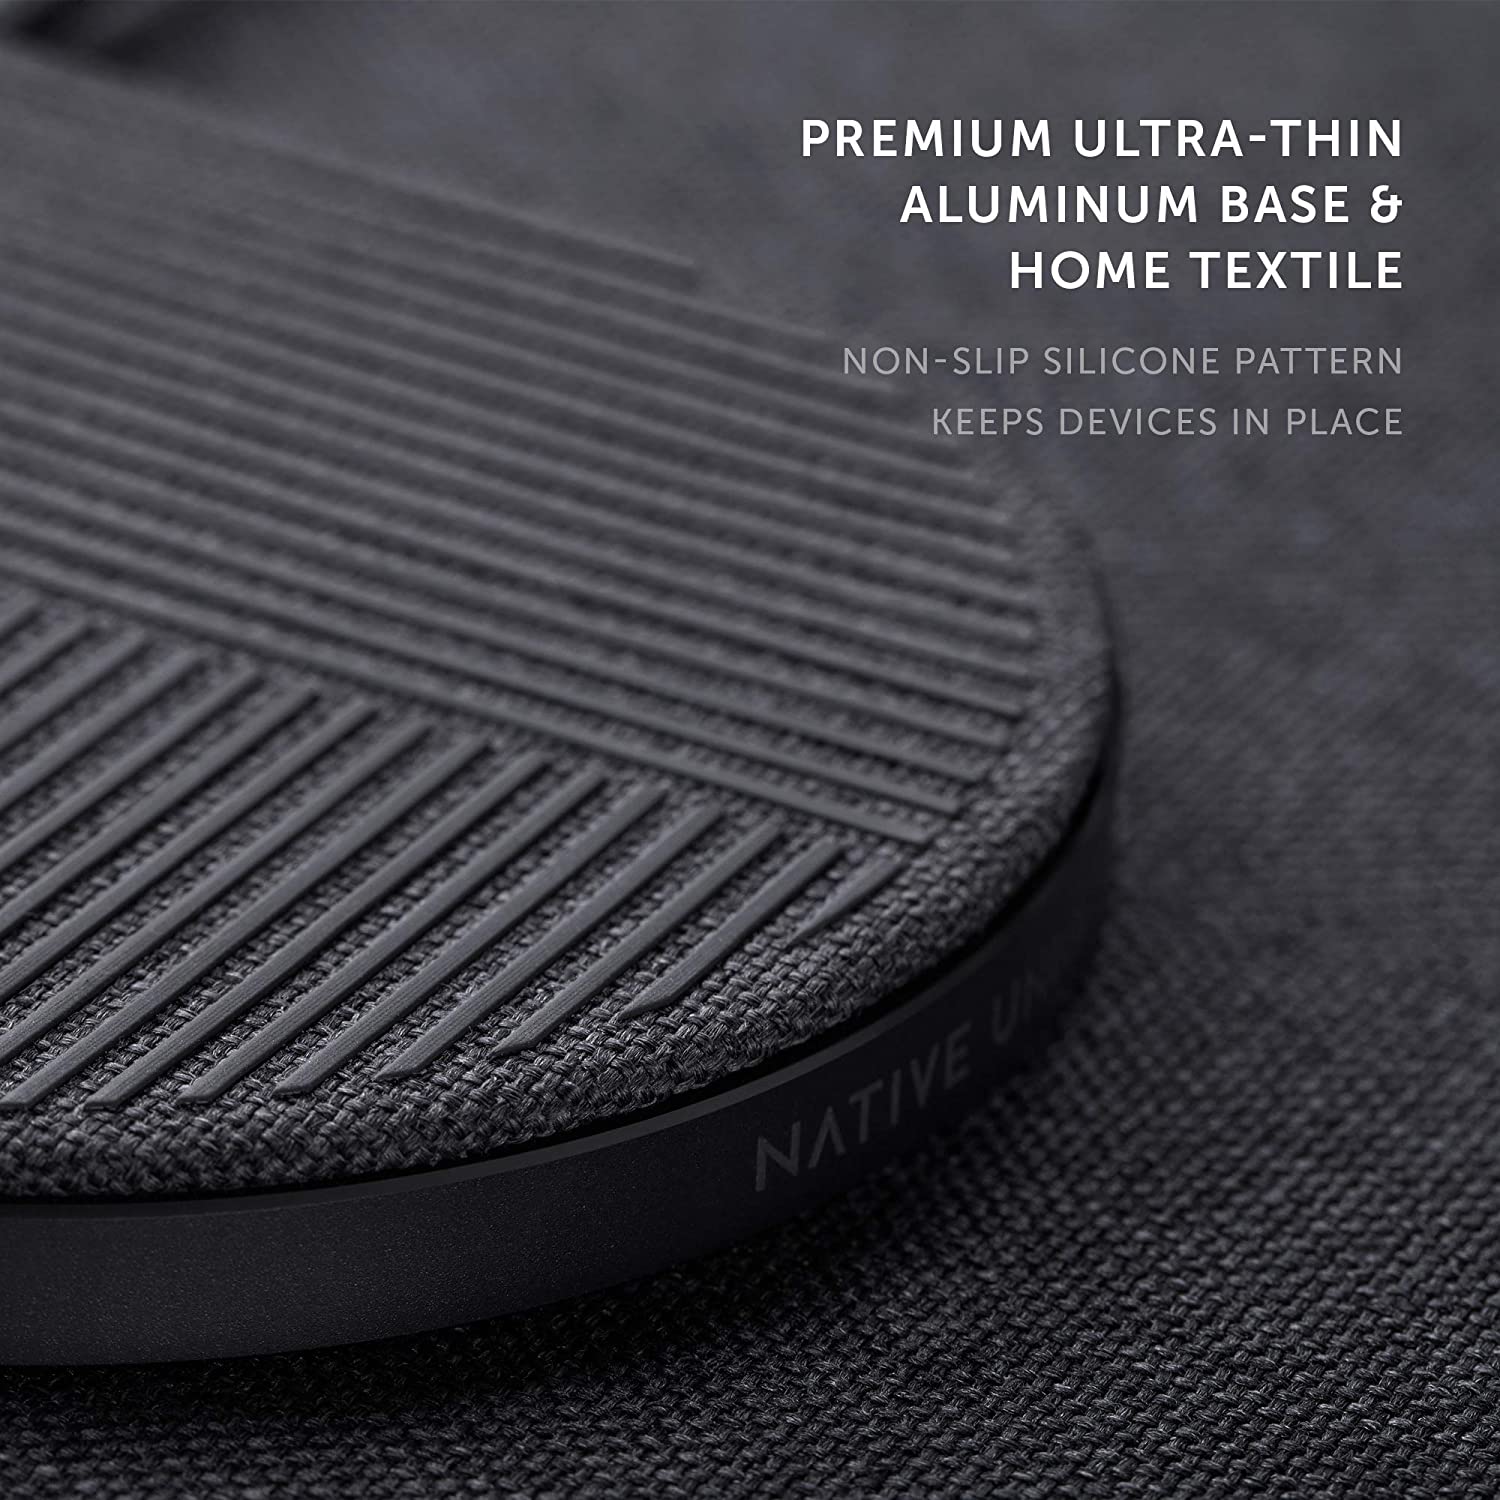 Native Union Drop Wireless XL Charger